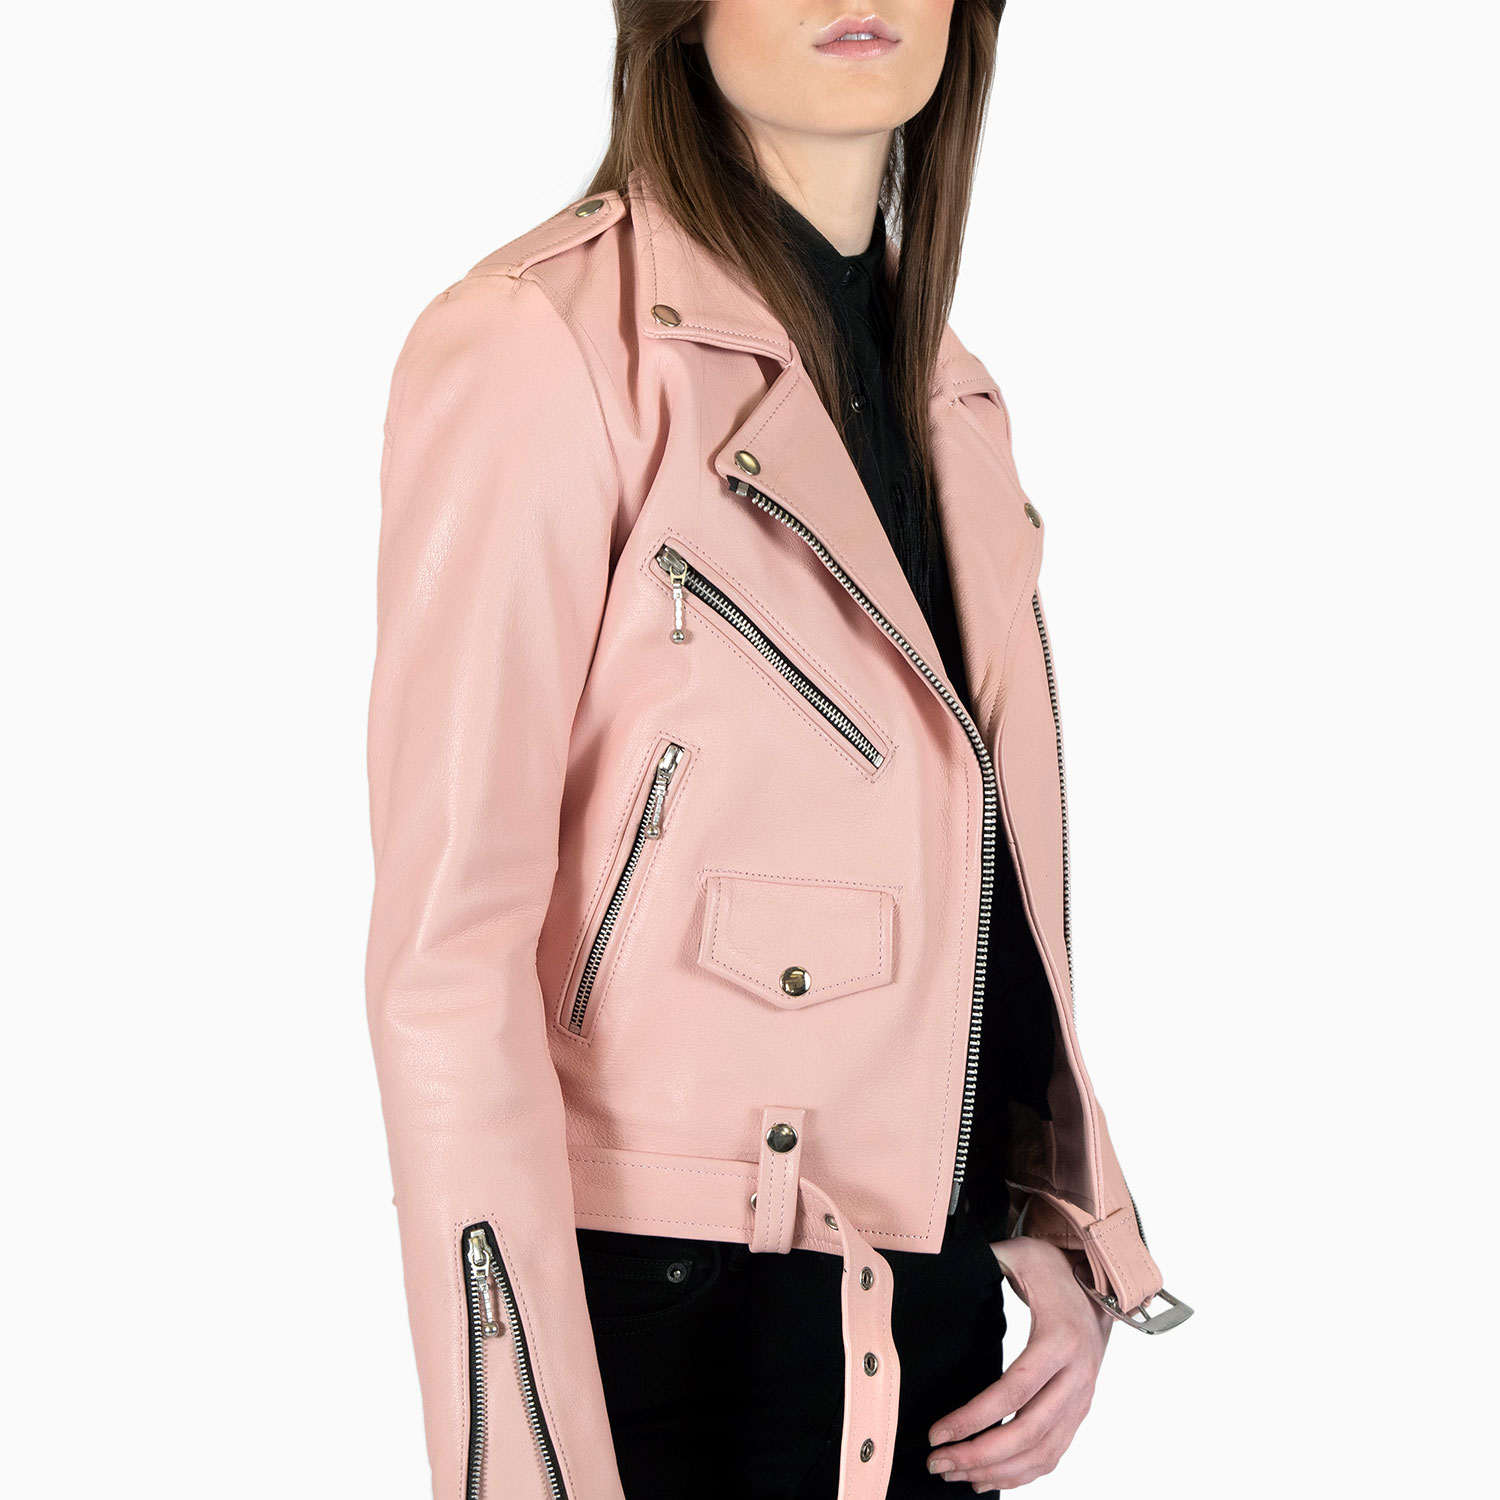 Dusty Pink Commando S, Apparel Jacket 2XL, Hell XS, - Leather 4XL) To XL, | L, M, (Size Straight 3XL,